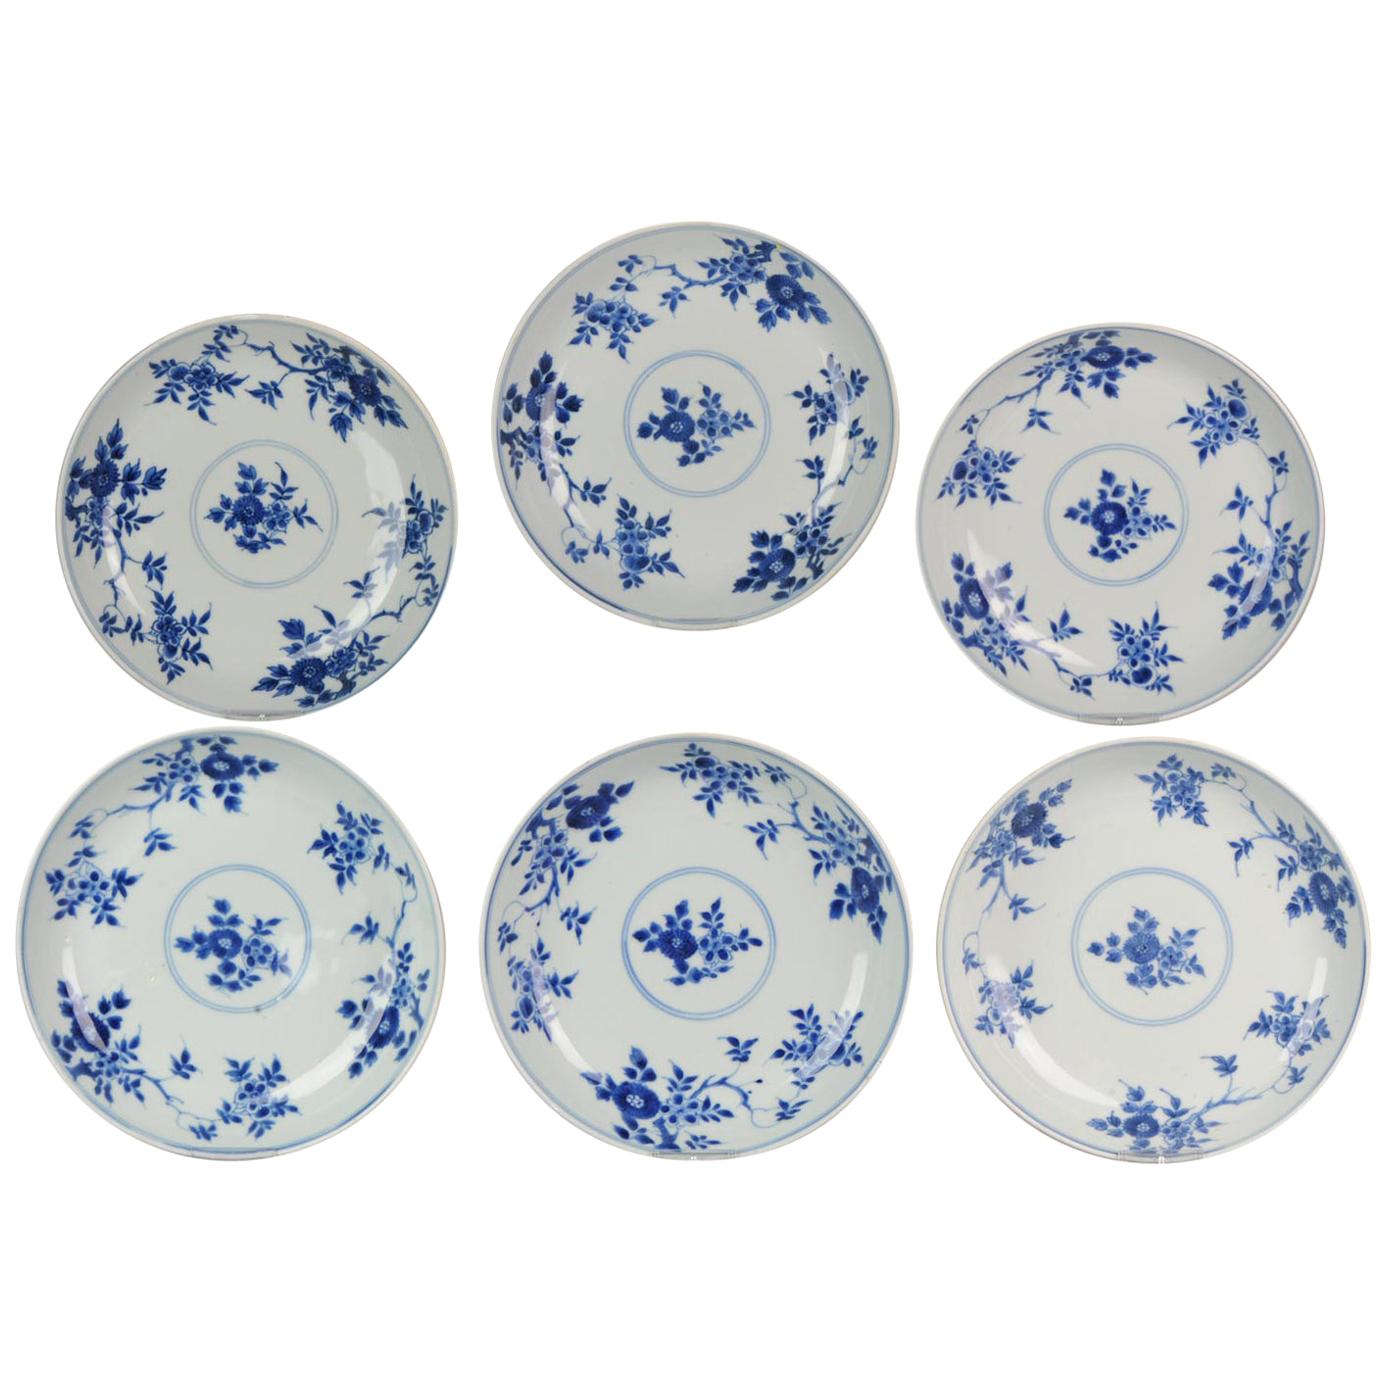 Antique Chinese 1700 Kangxi Period Batavian Blue White Dinner Set Marked Fishes For Sale